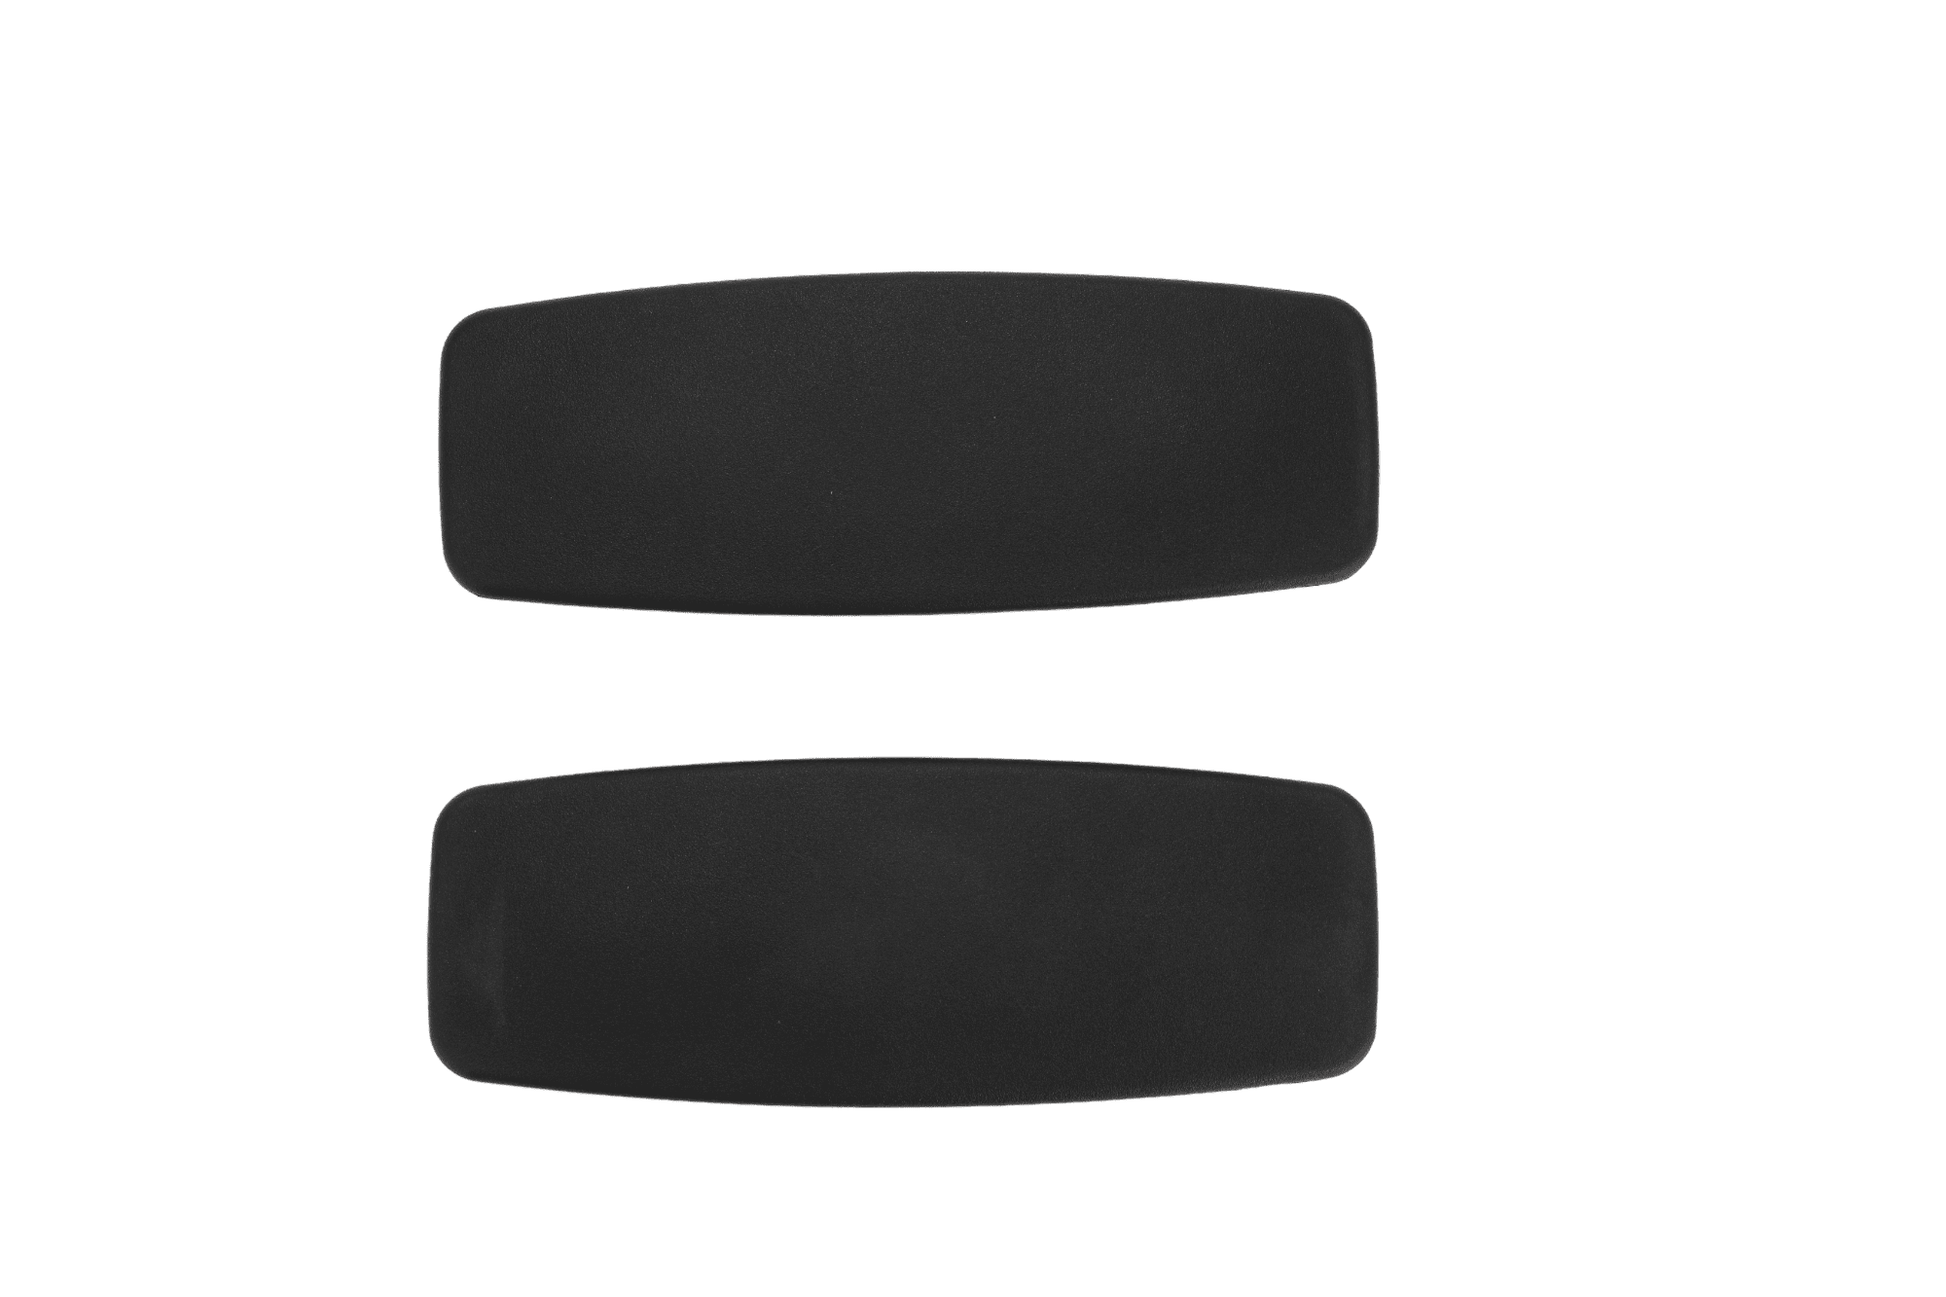 Arm Pads for Steelcase Leap V2 chair- Pair - chairorama